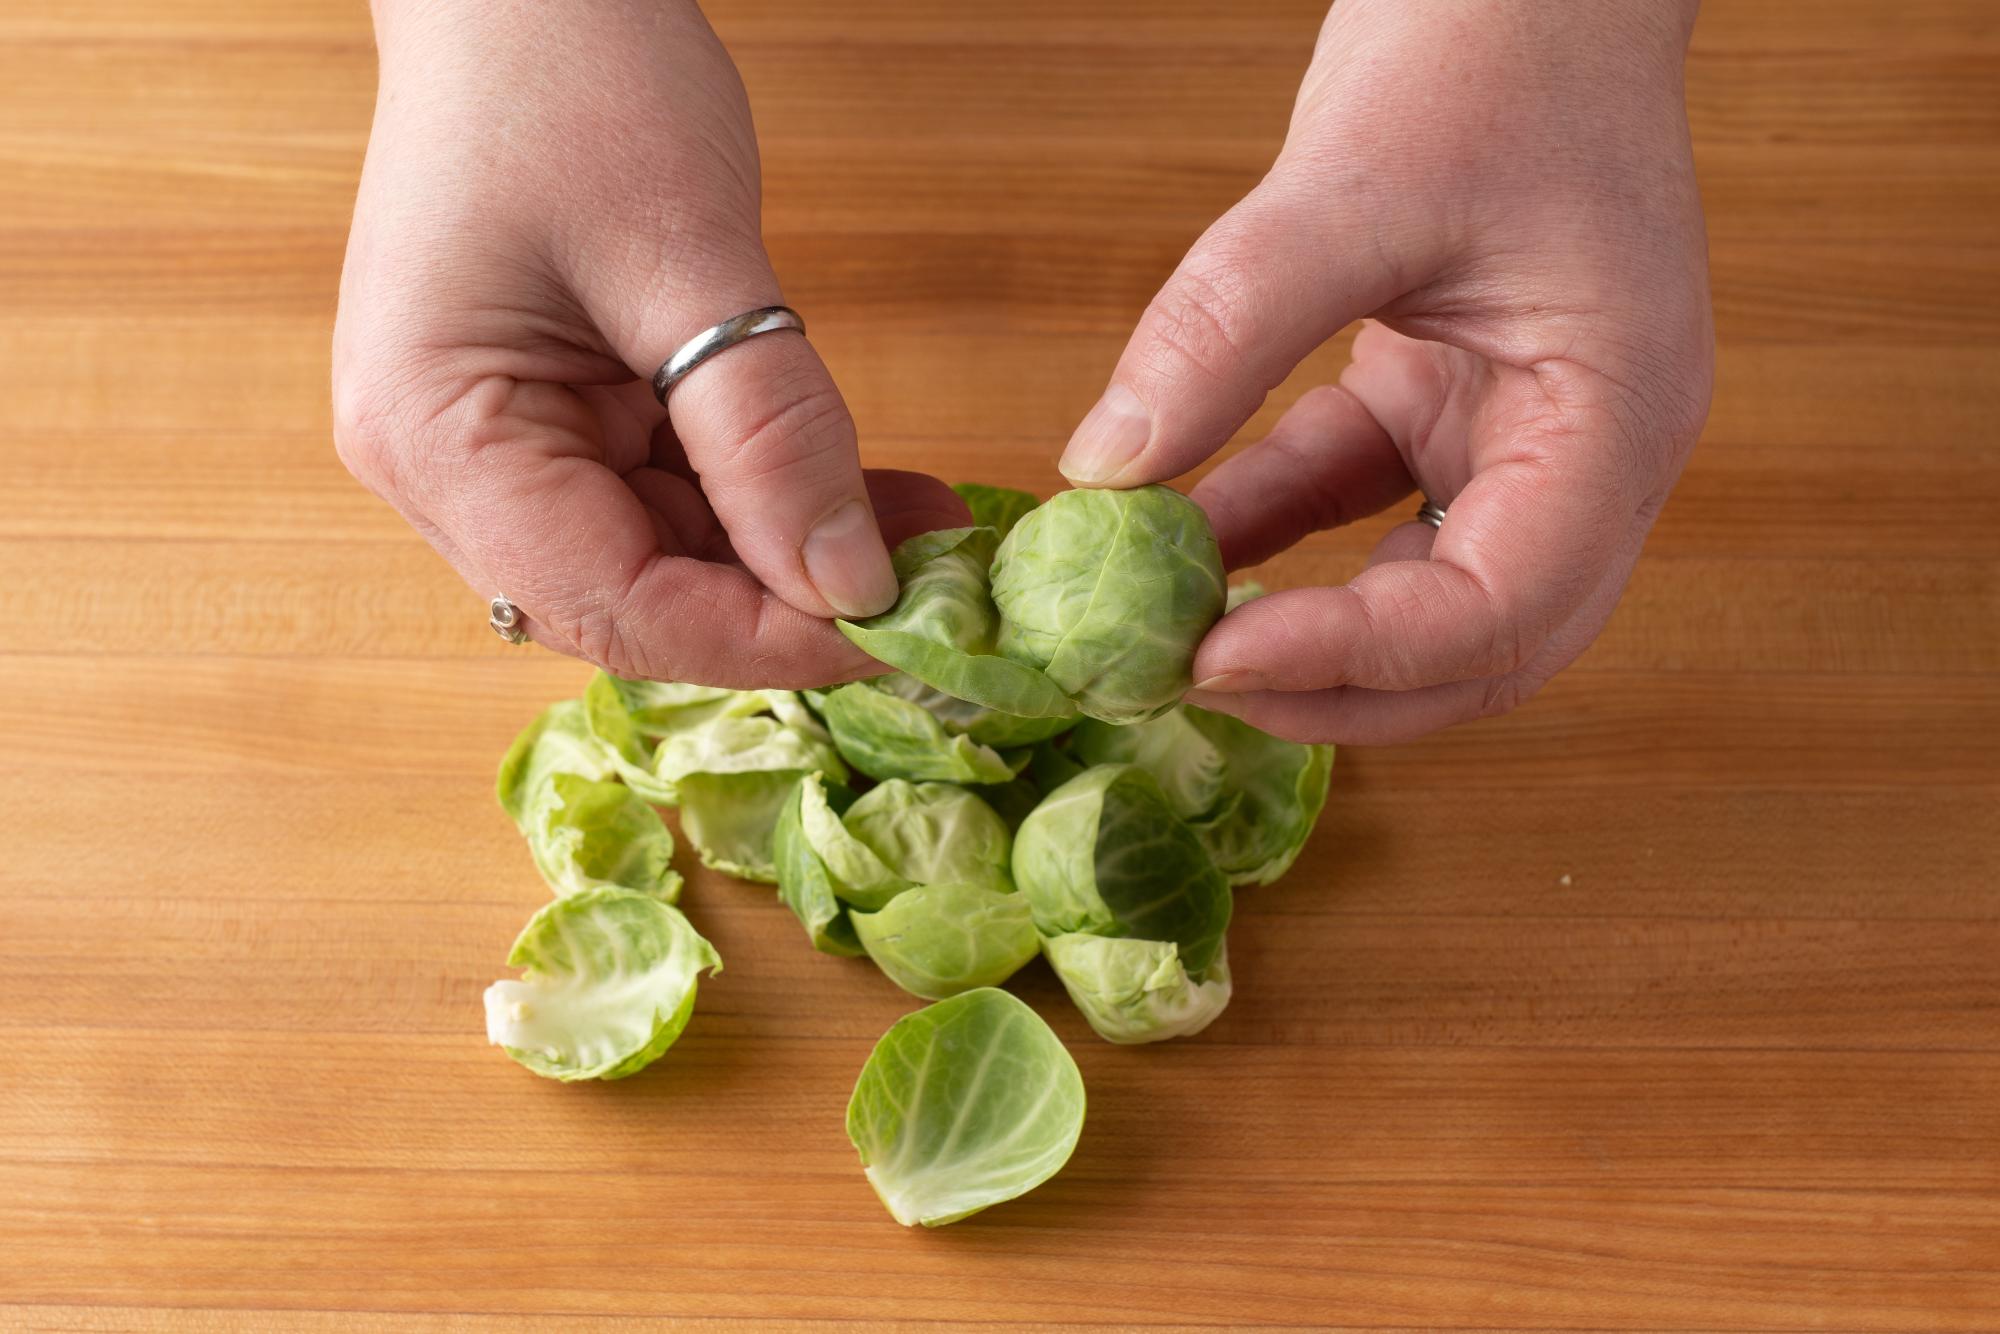 Peeling off the brussels sprouts leaves.